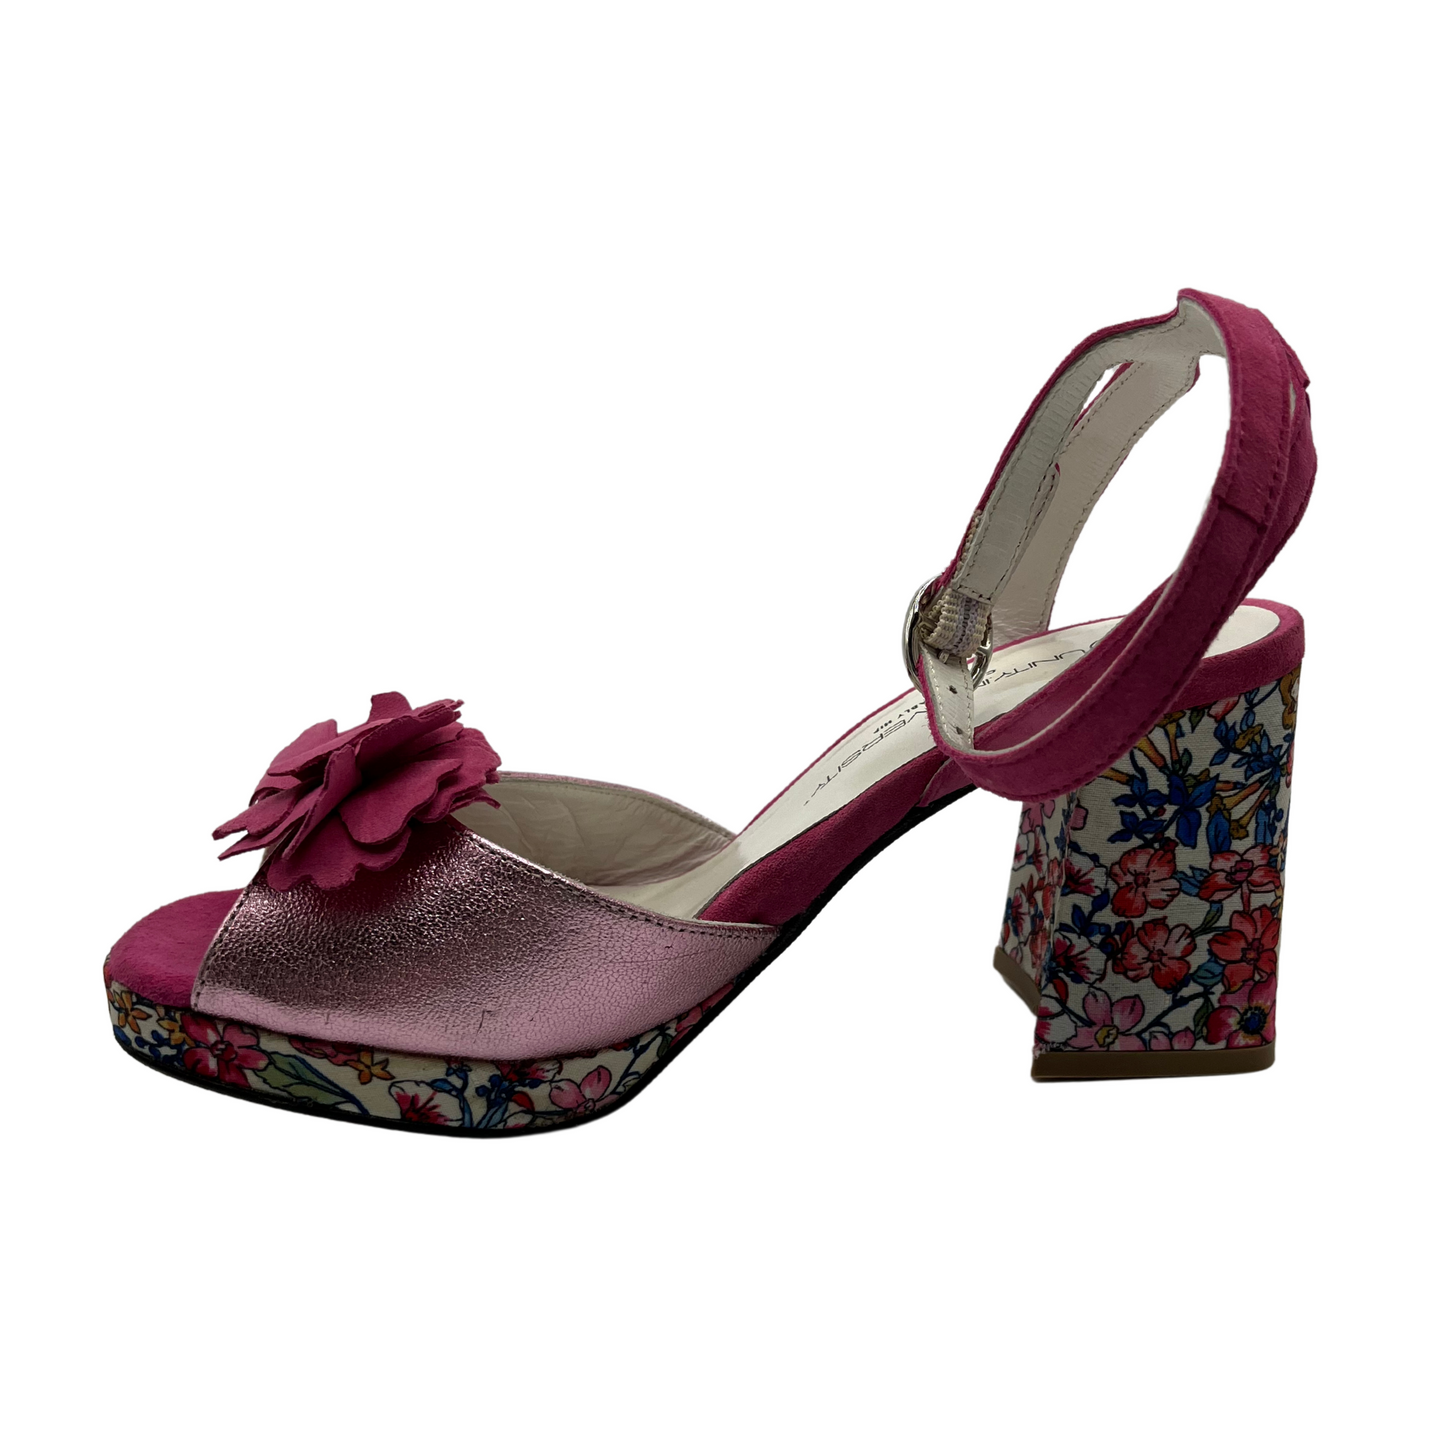 Left facing view of leather and satin material sandal with block heel and platform sole. Flower accent on toe and adjustable ankle strap